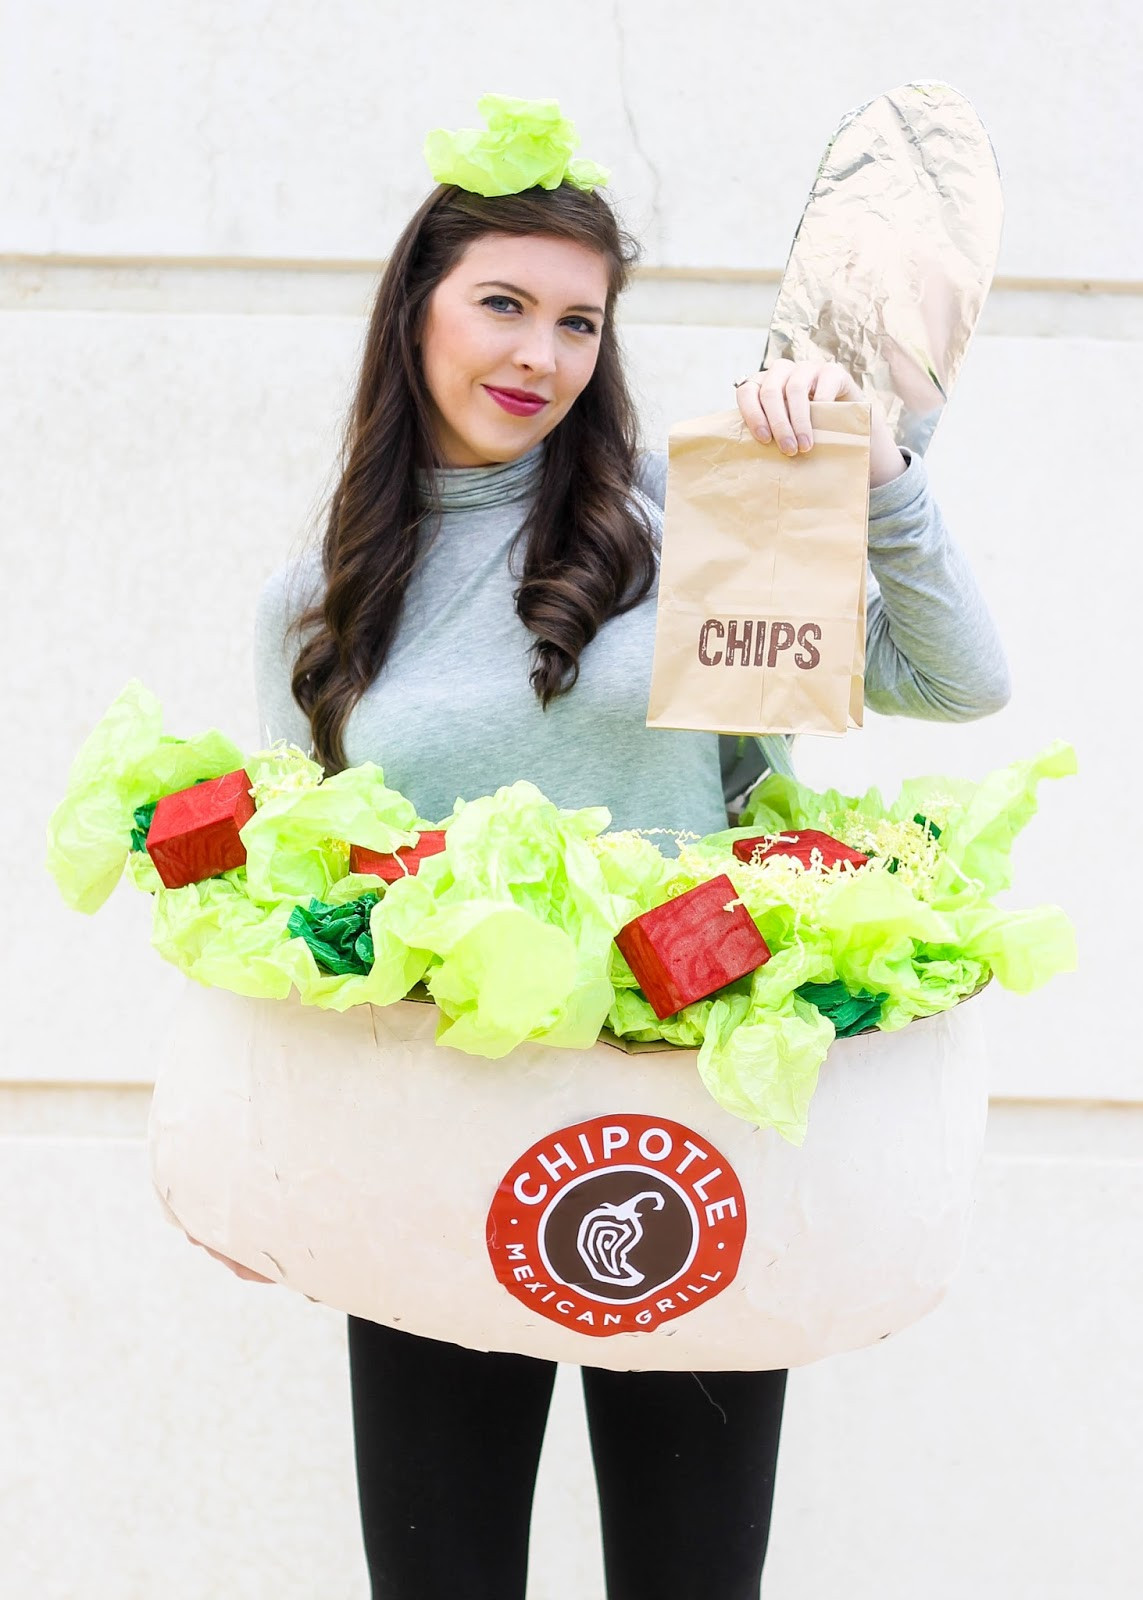 Halloween Diy Costumes
 Halloween Chipotle Costume DIY Pretty in the Pines